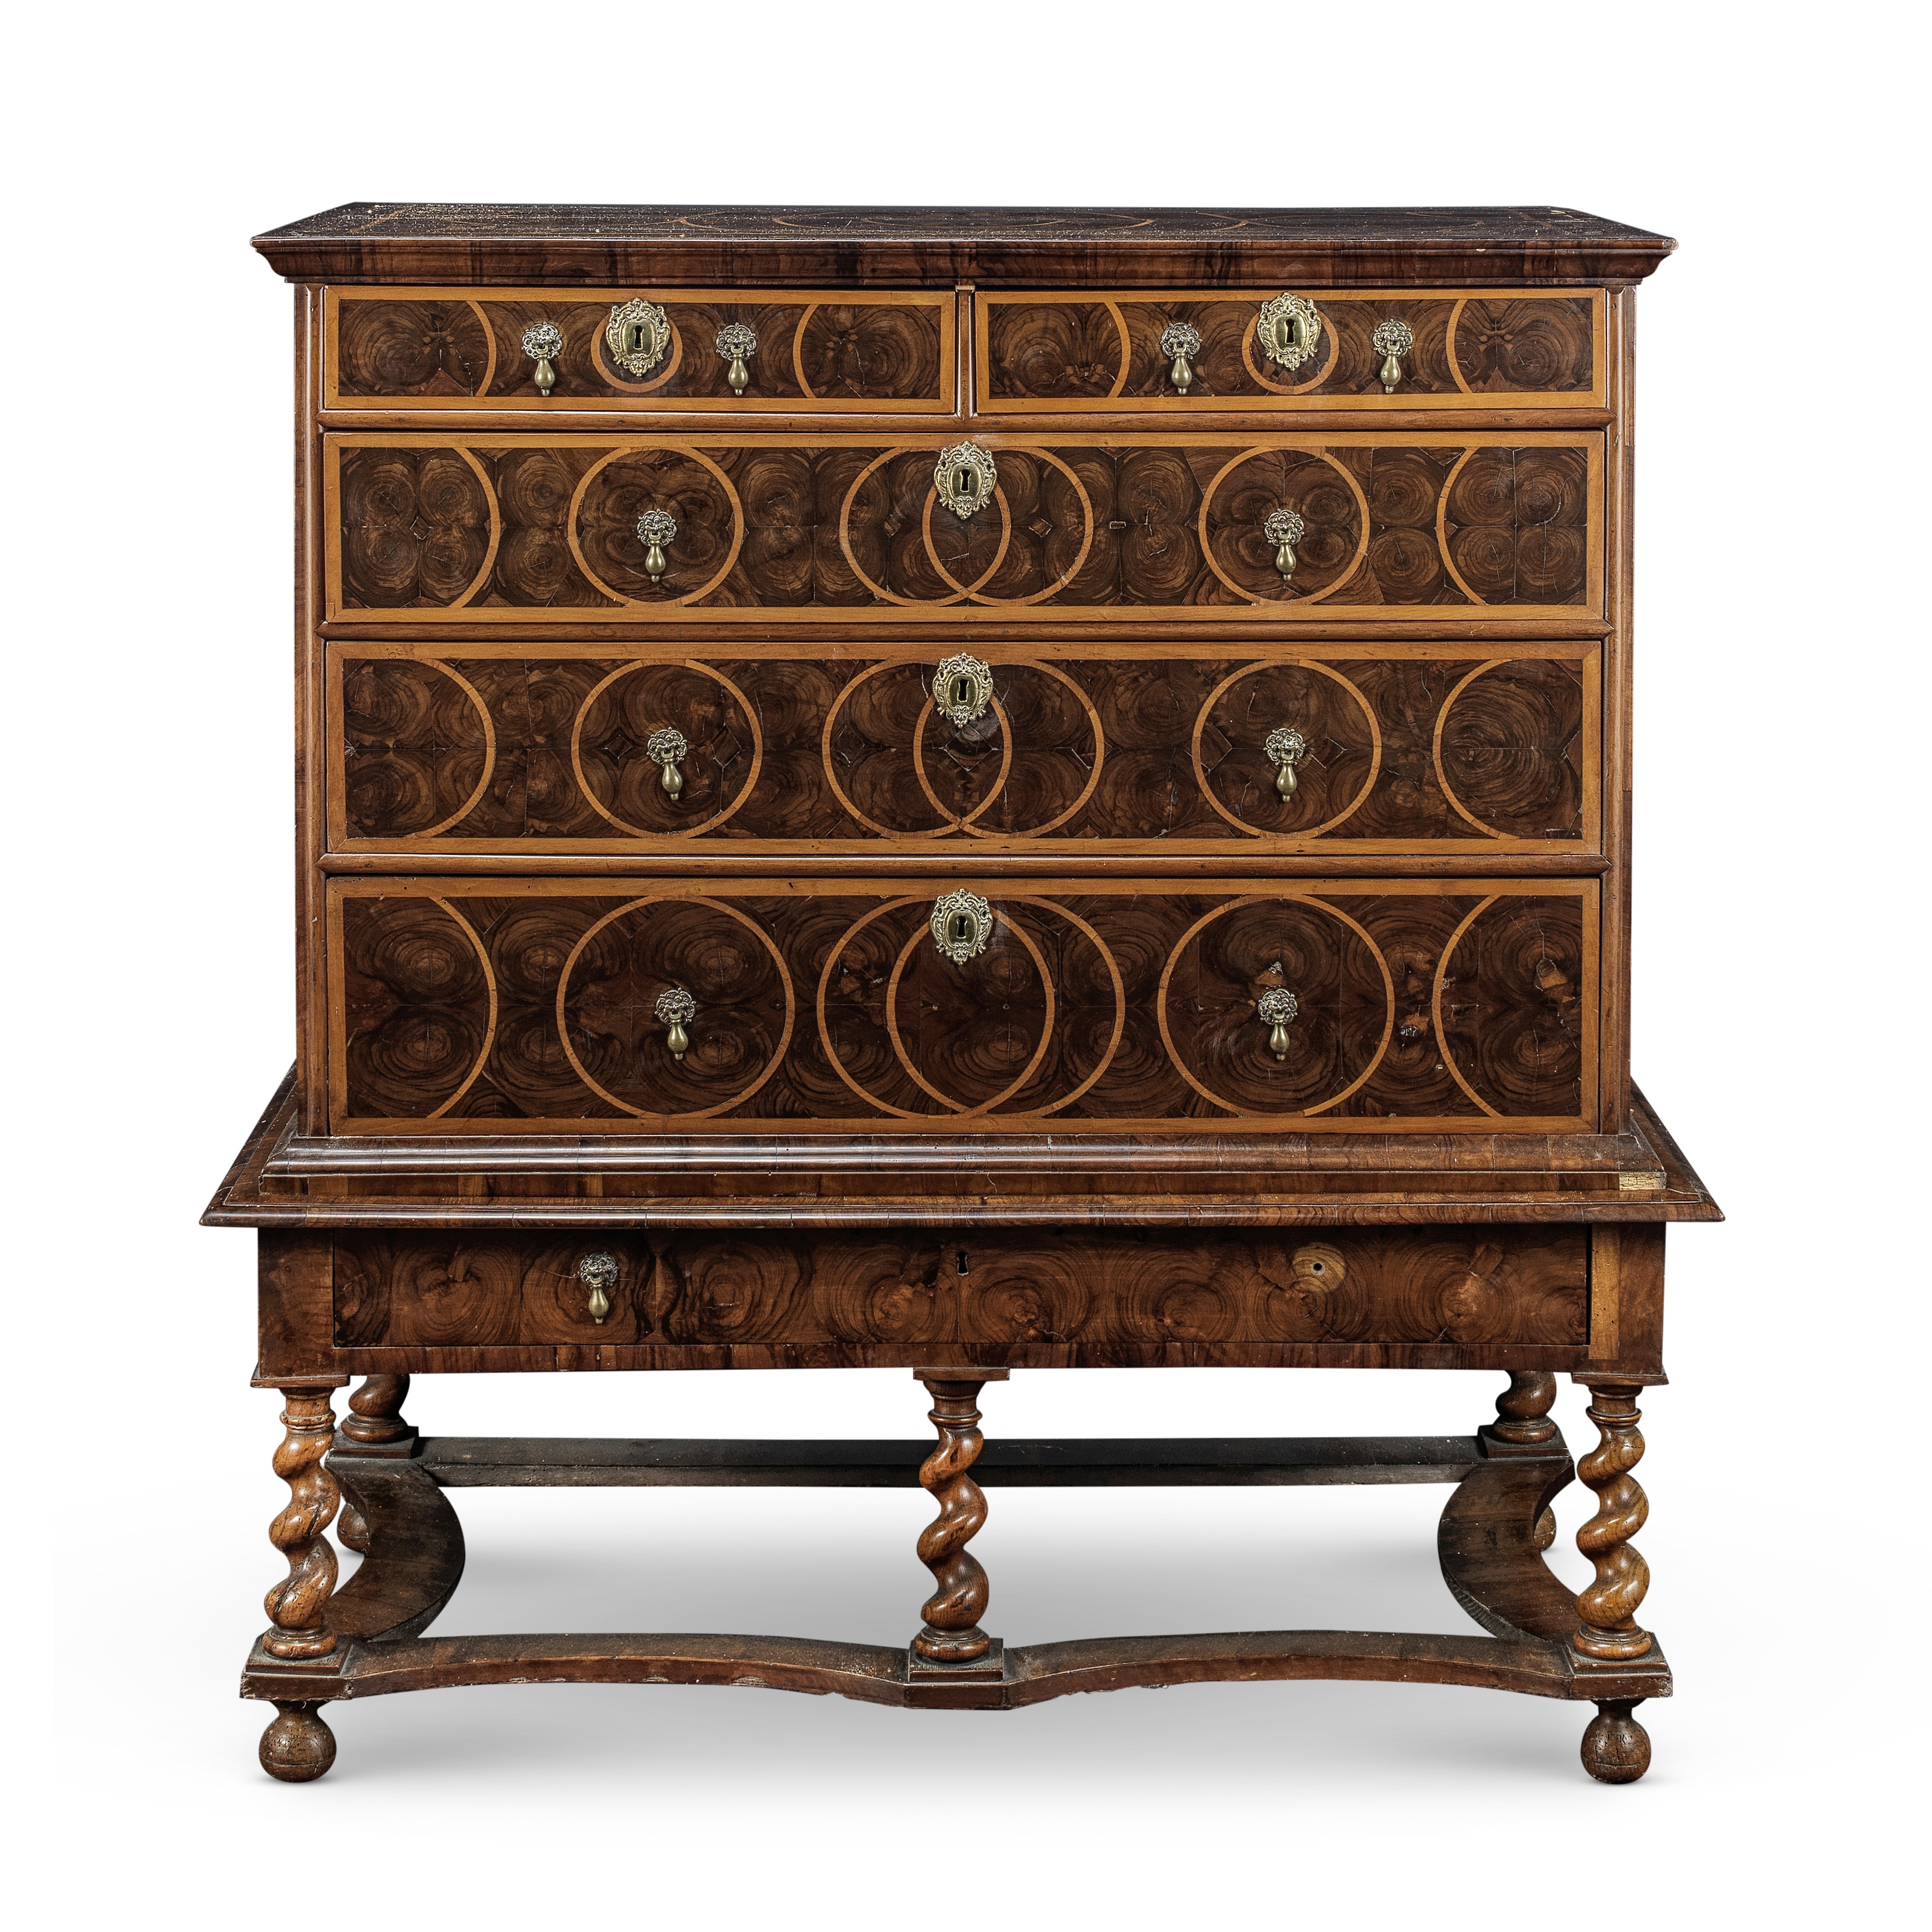 A late 17th century walnut, fruitwood and oyster veneered chest on stand